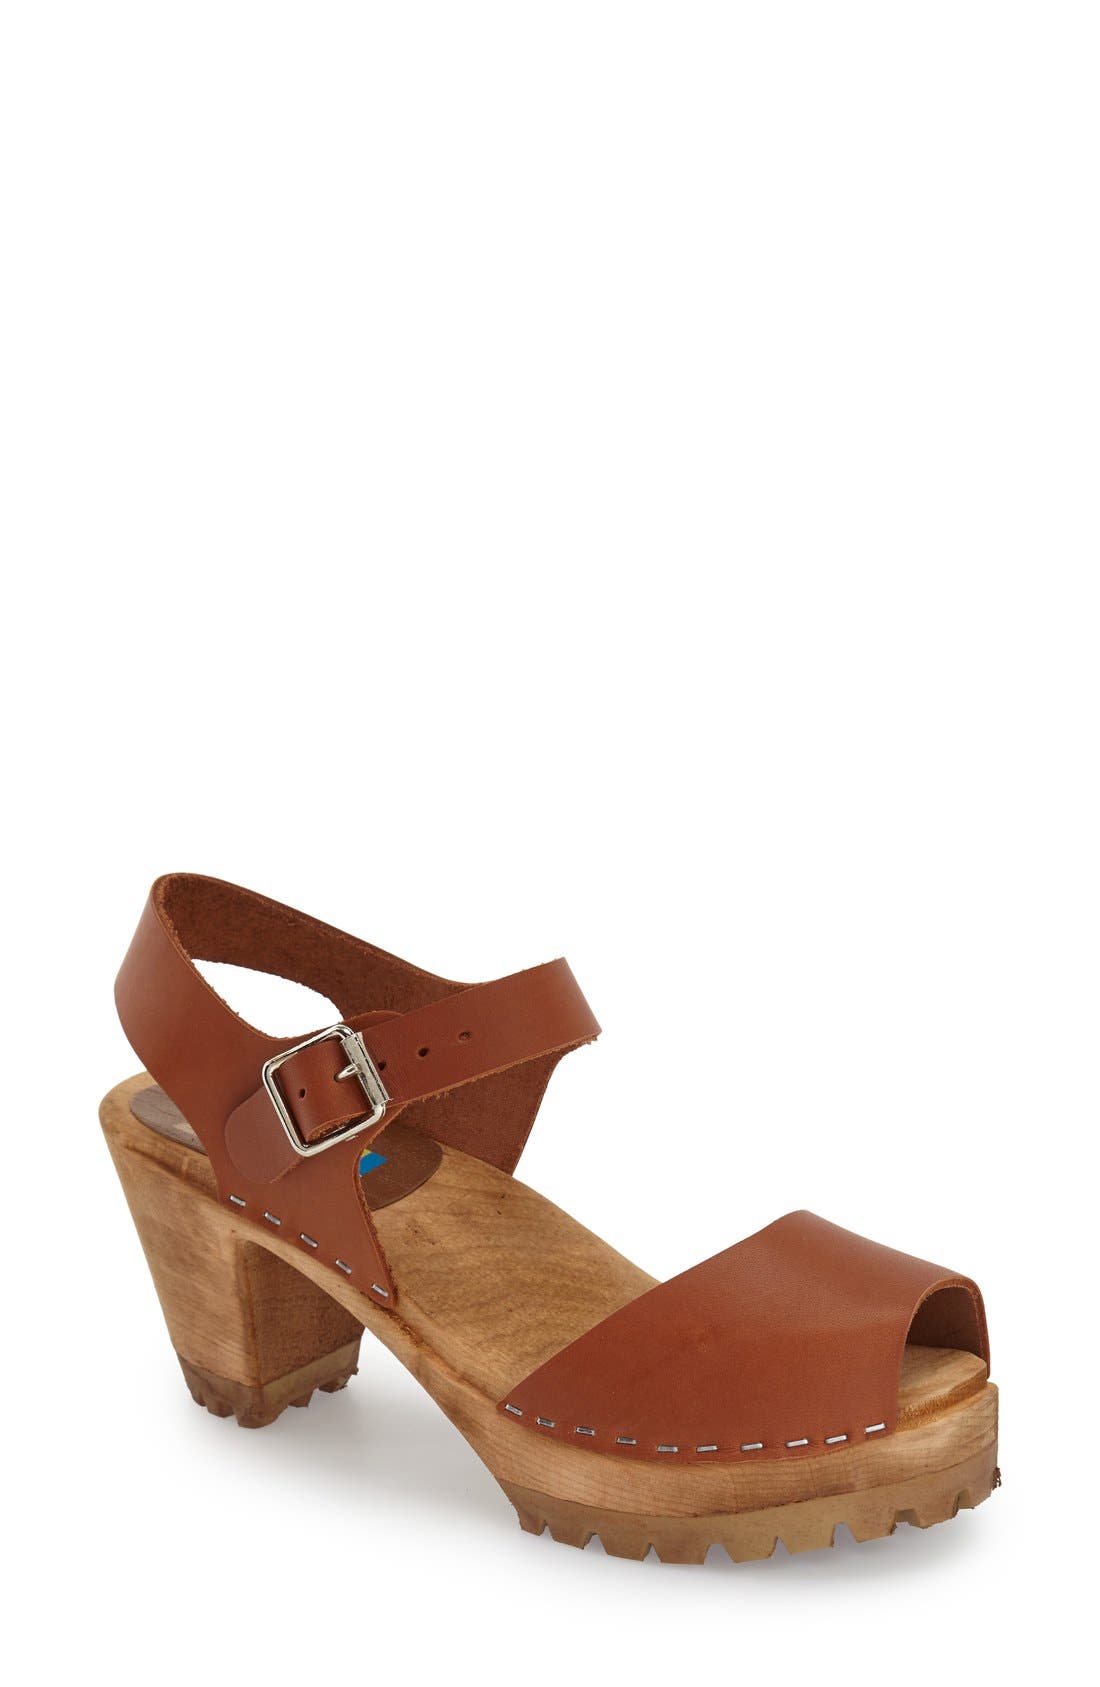 nordstrom womens clogs